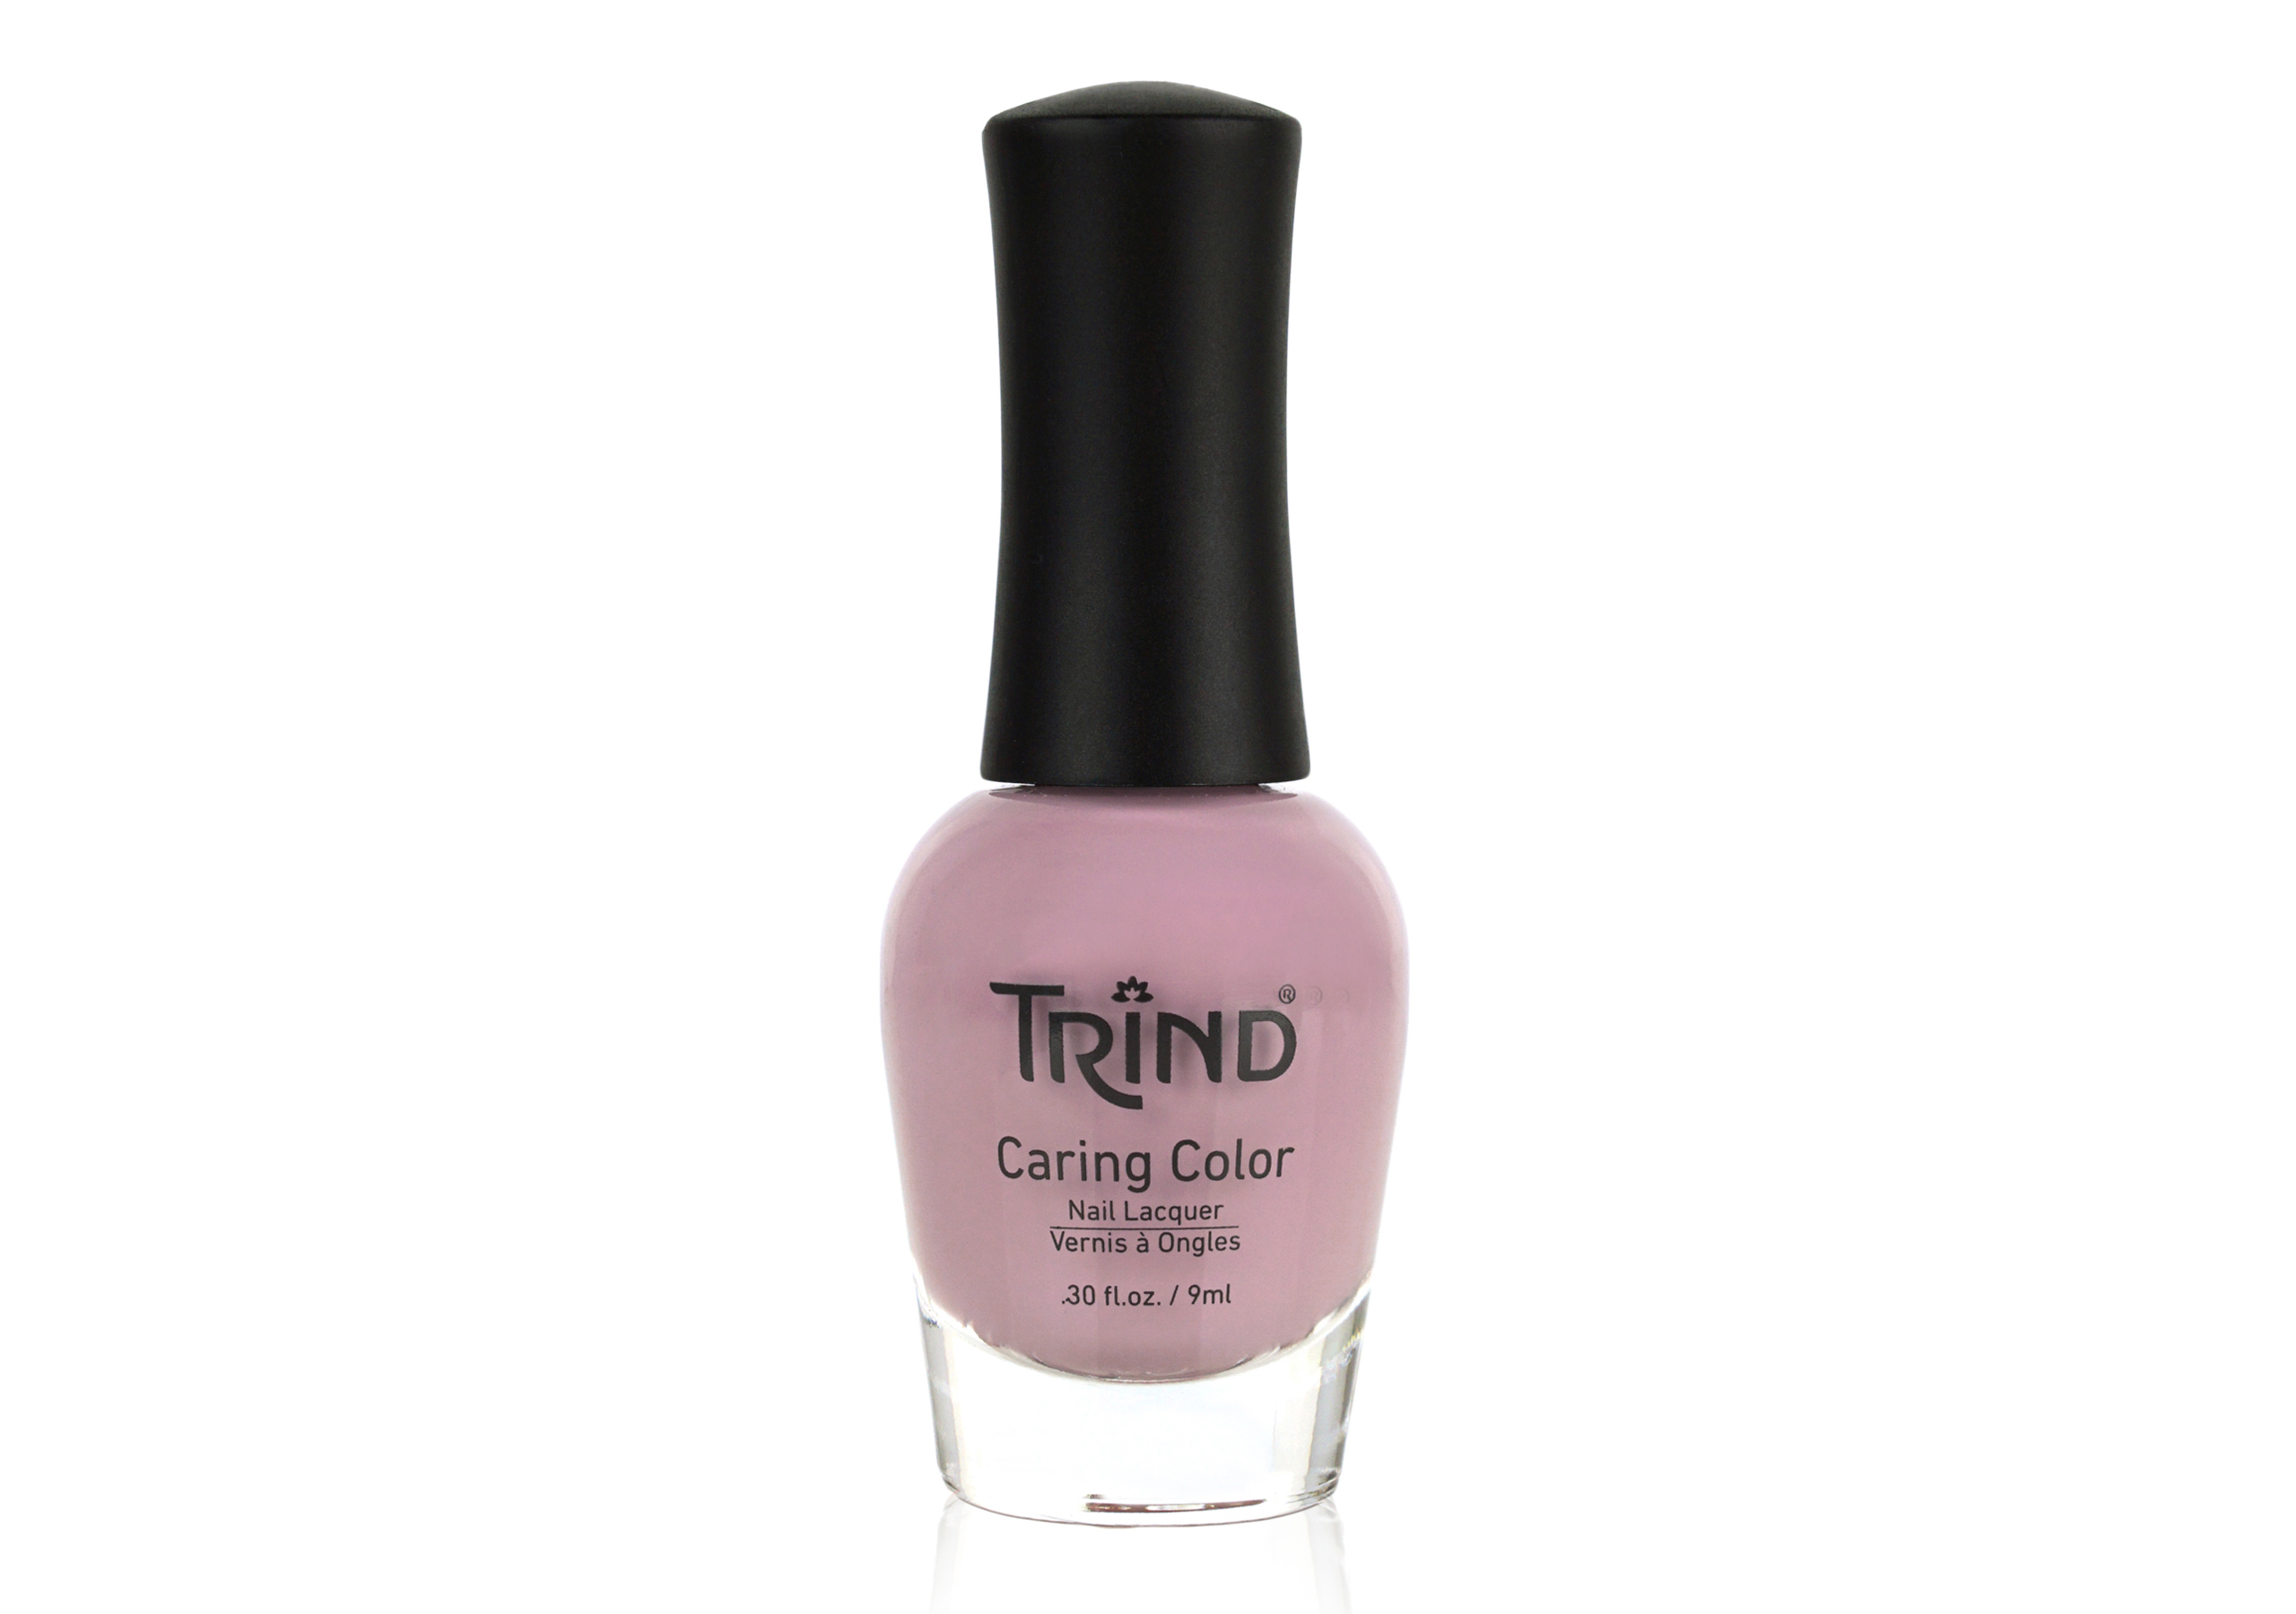 2. "Mauve Over" Nail Lacquer by OPI - wide 10